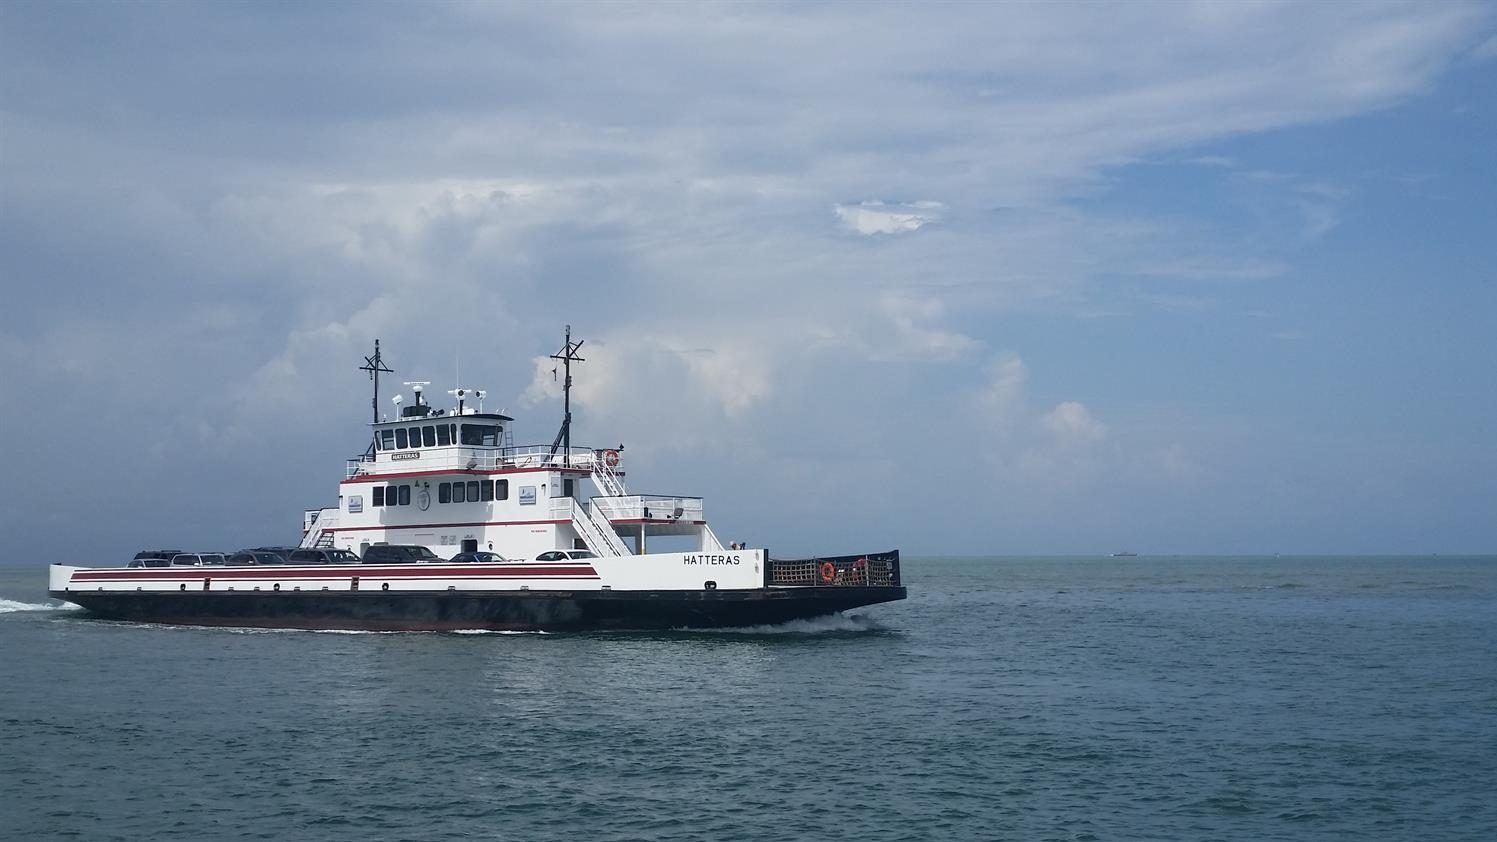 Hatteras-Ocracoke ferry switches to spring schedule on April 25